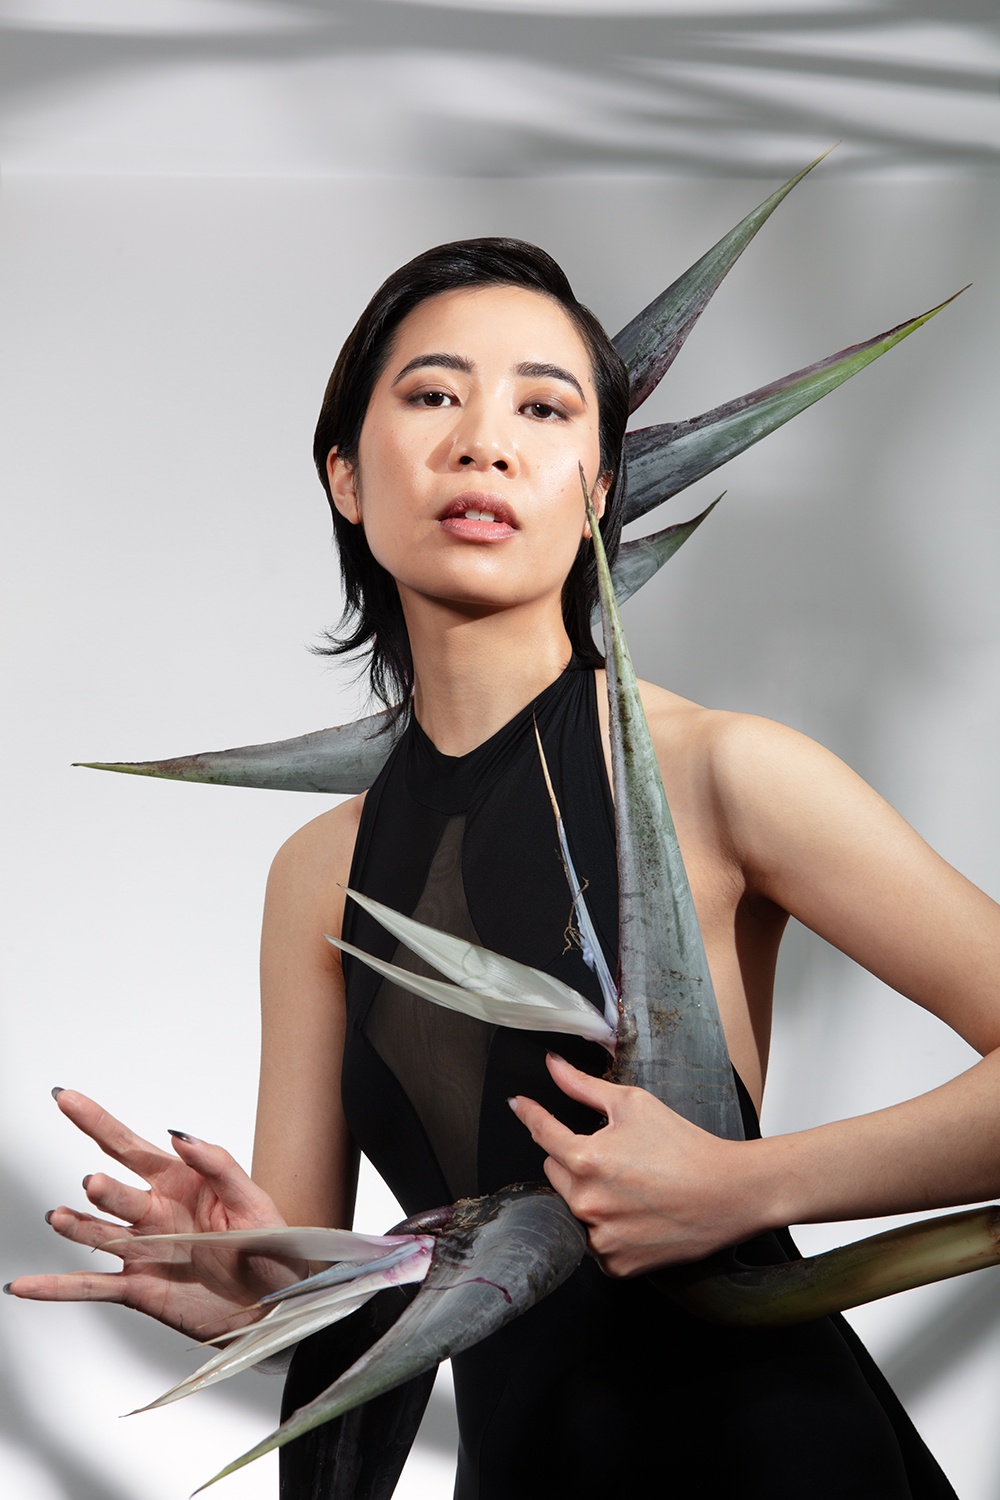 Xuan with smokey eye makeup posed with two bird of paradise flowers against a gray background